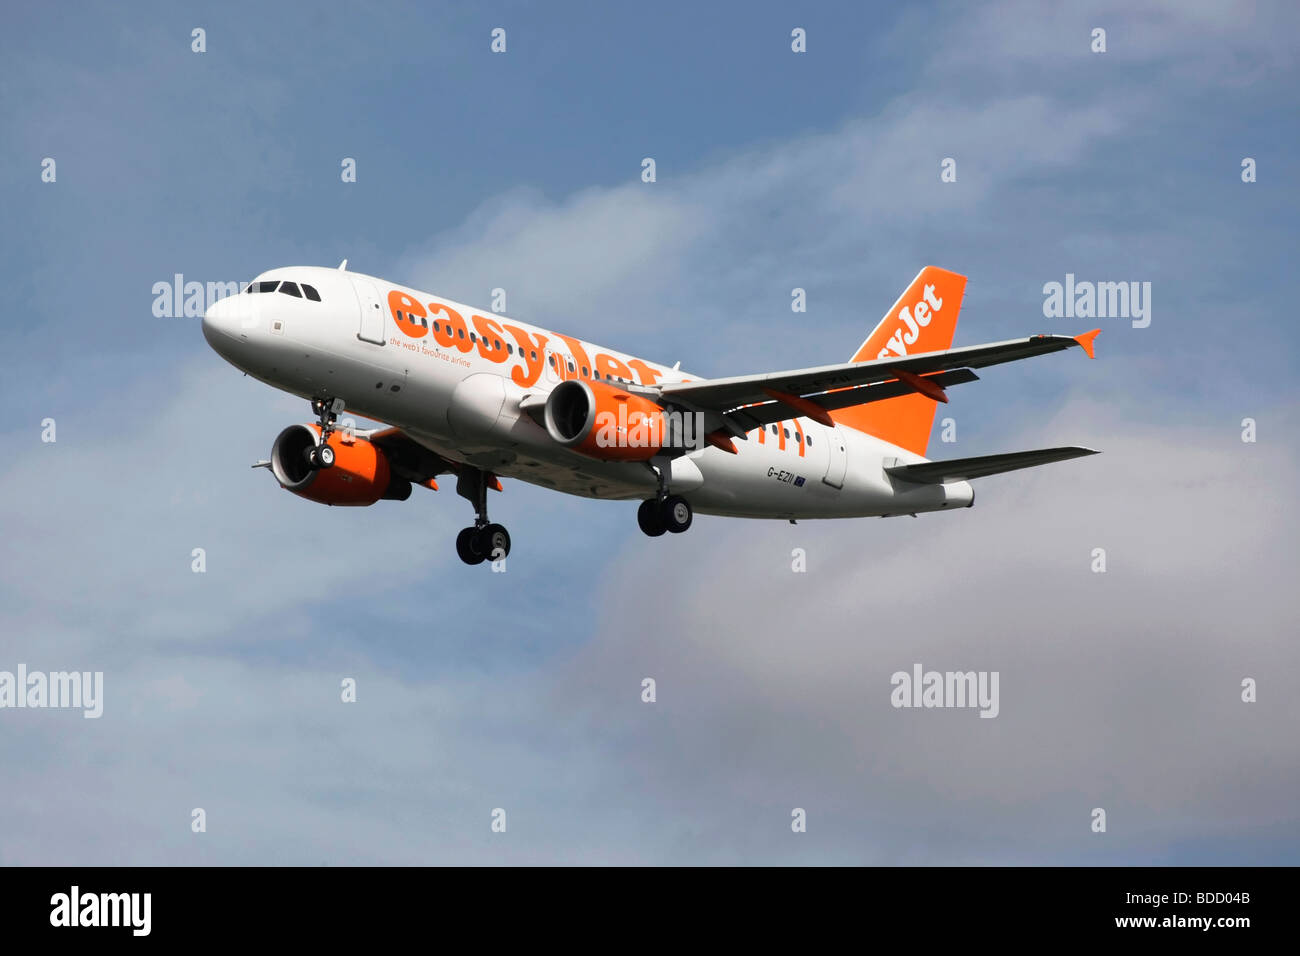 An Airbus A319 aircraft of Easy Jet on final approach Stock Photo